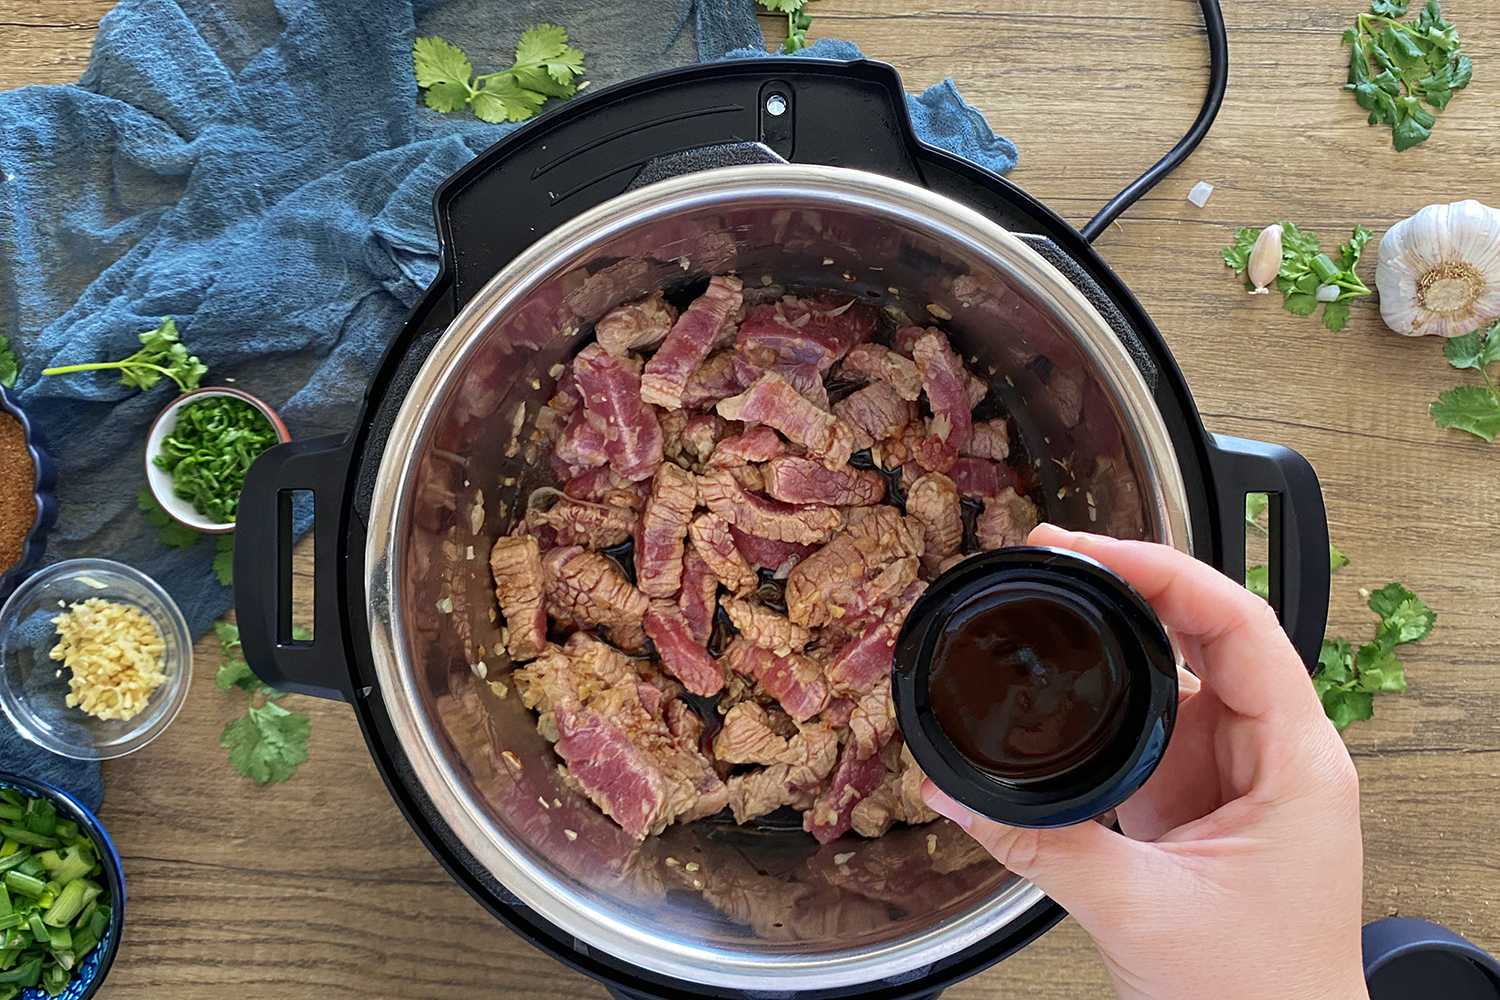 https://storables.com/wp-content/uploads/2023/07/how-to-cook-meat-in-an-electric-pressure-cooker-1690766917.jpg